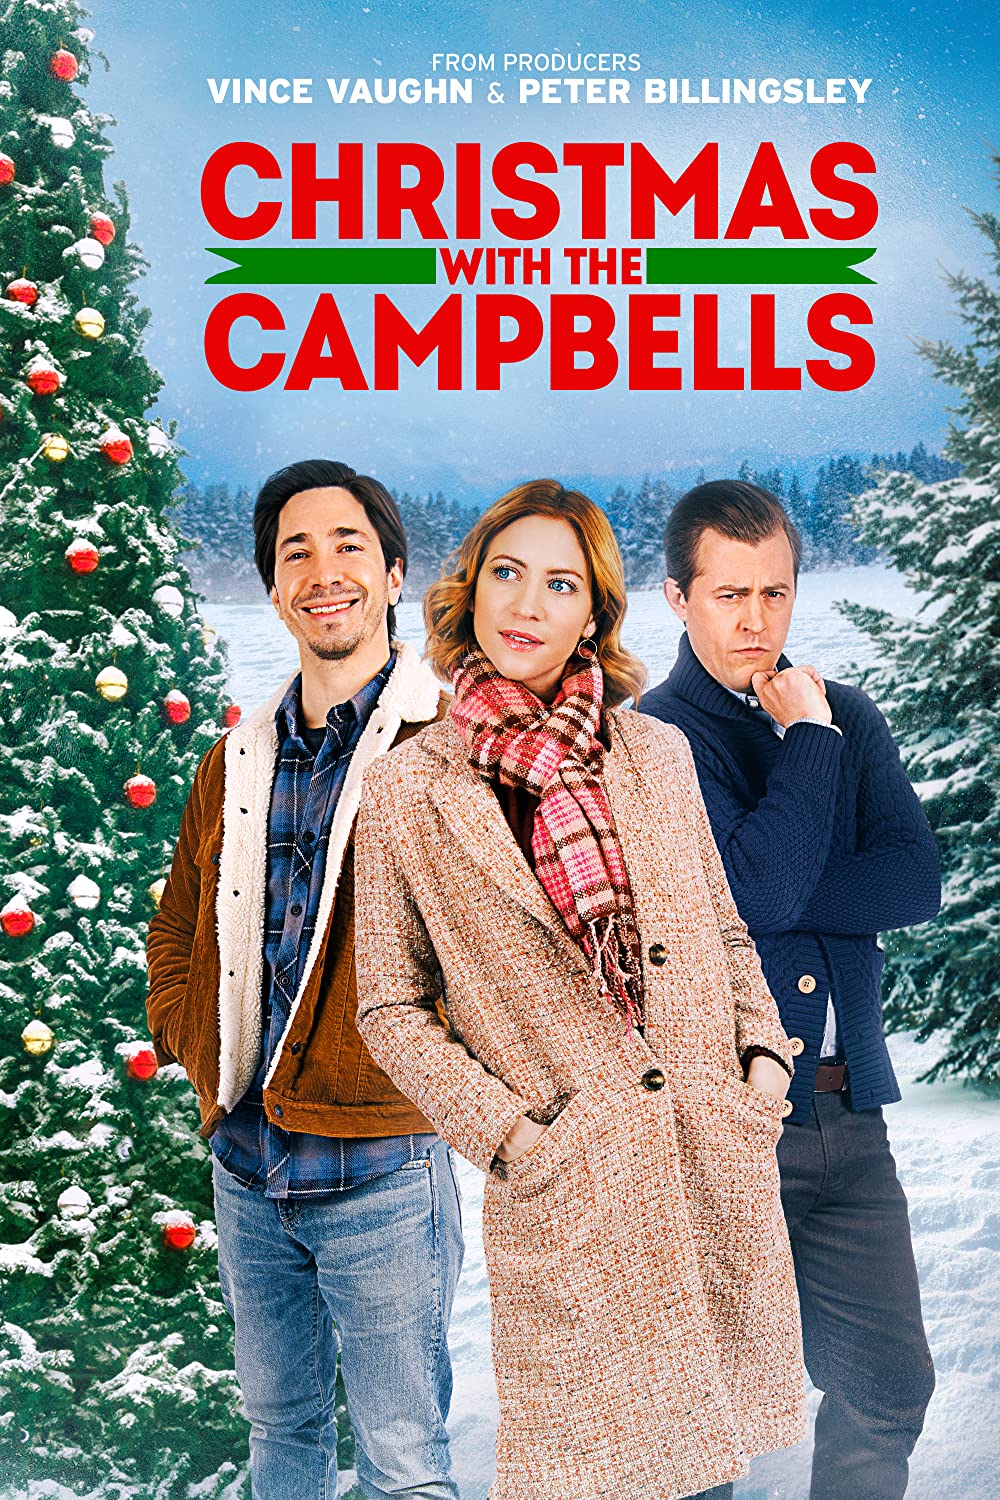 Christmas with the Campbells (2022) 480p HDRip Full English Movie ESubs [350MB]